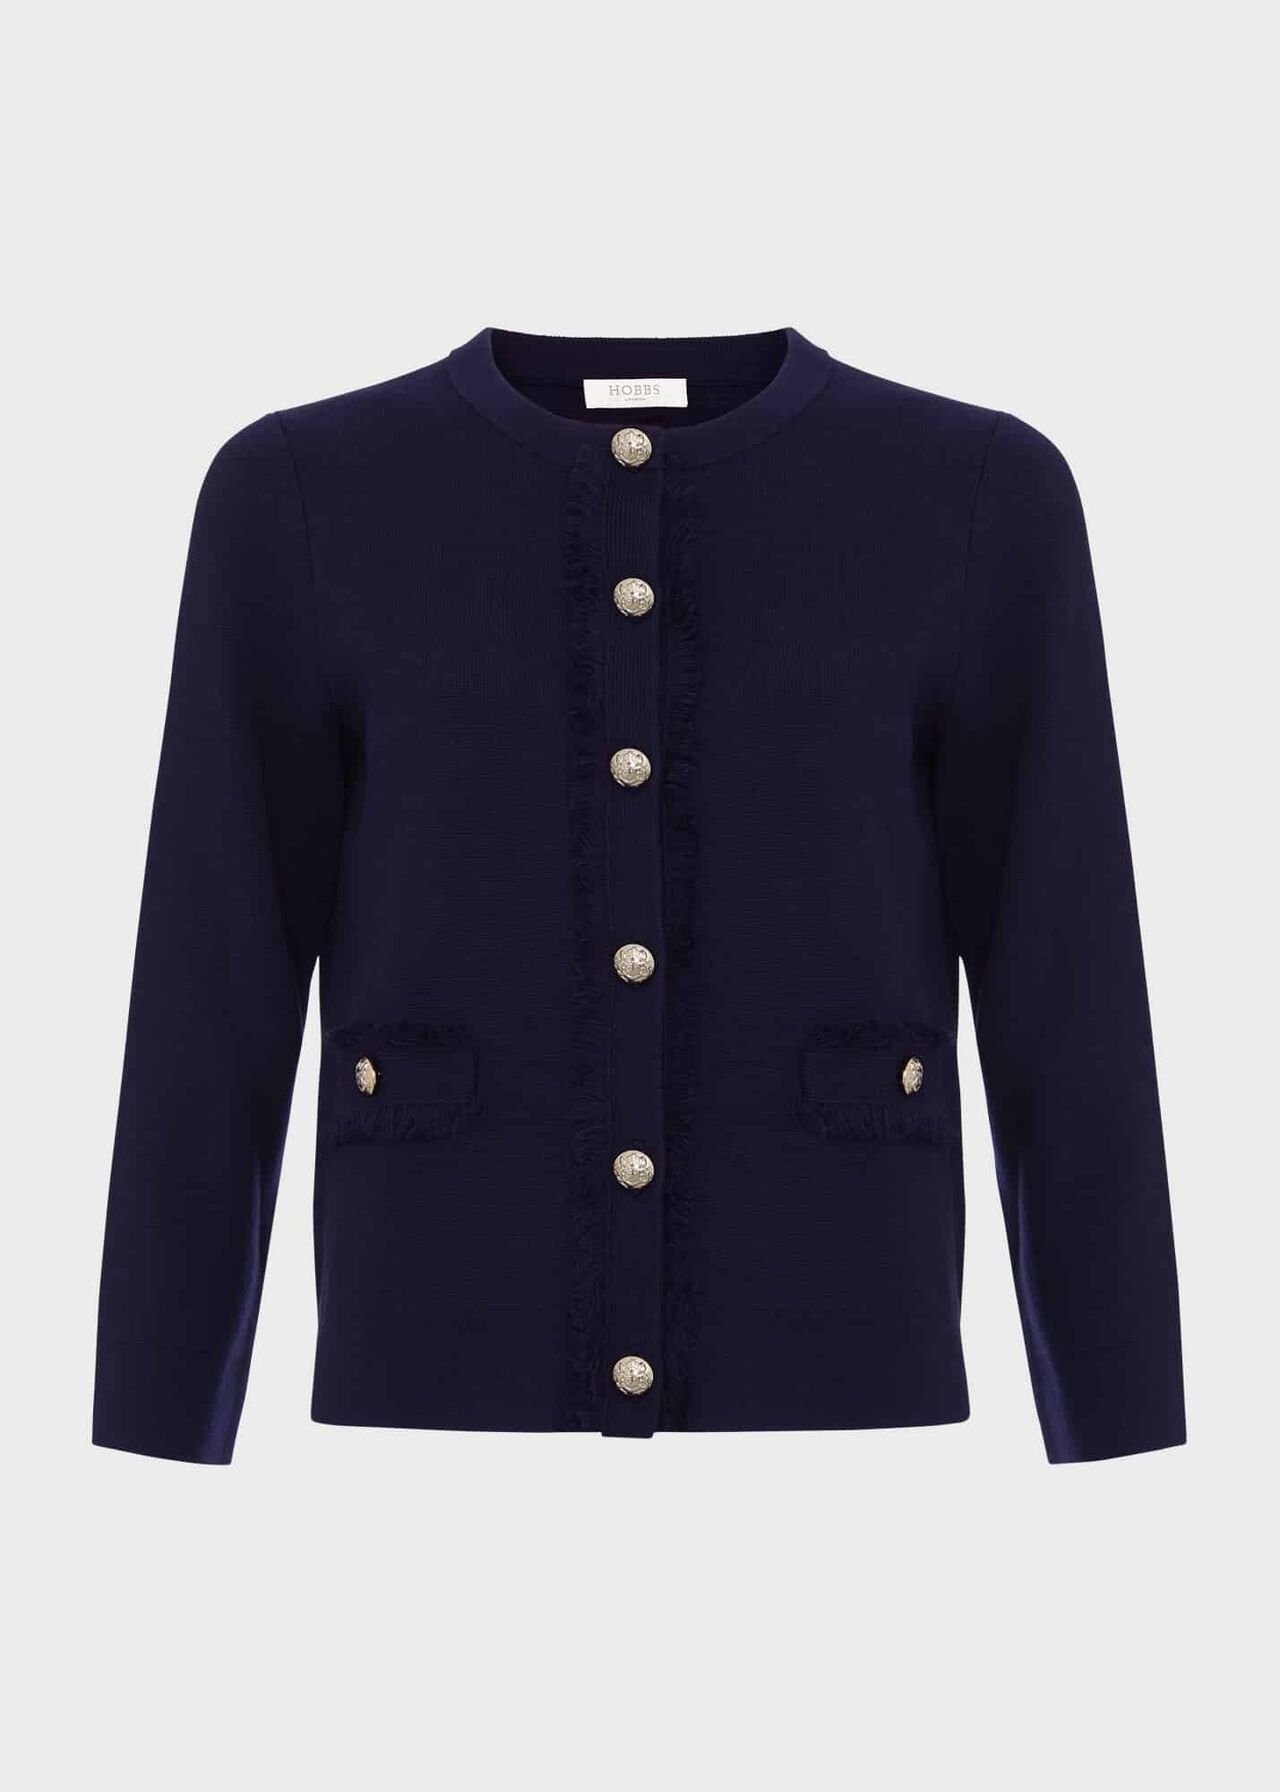 Sairey Cotton Wool Knitted Jacket, Midnight Navy, hi-res